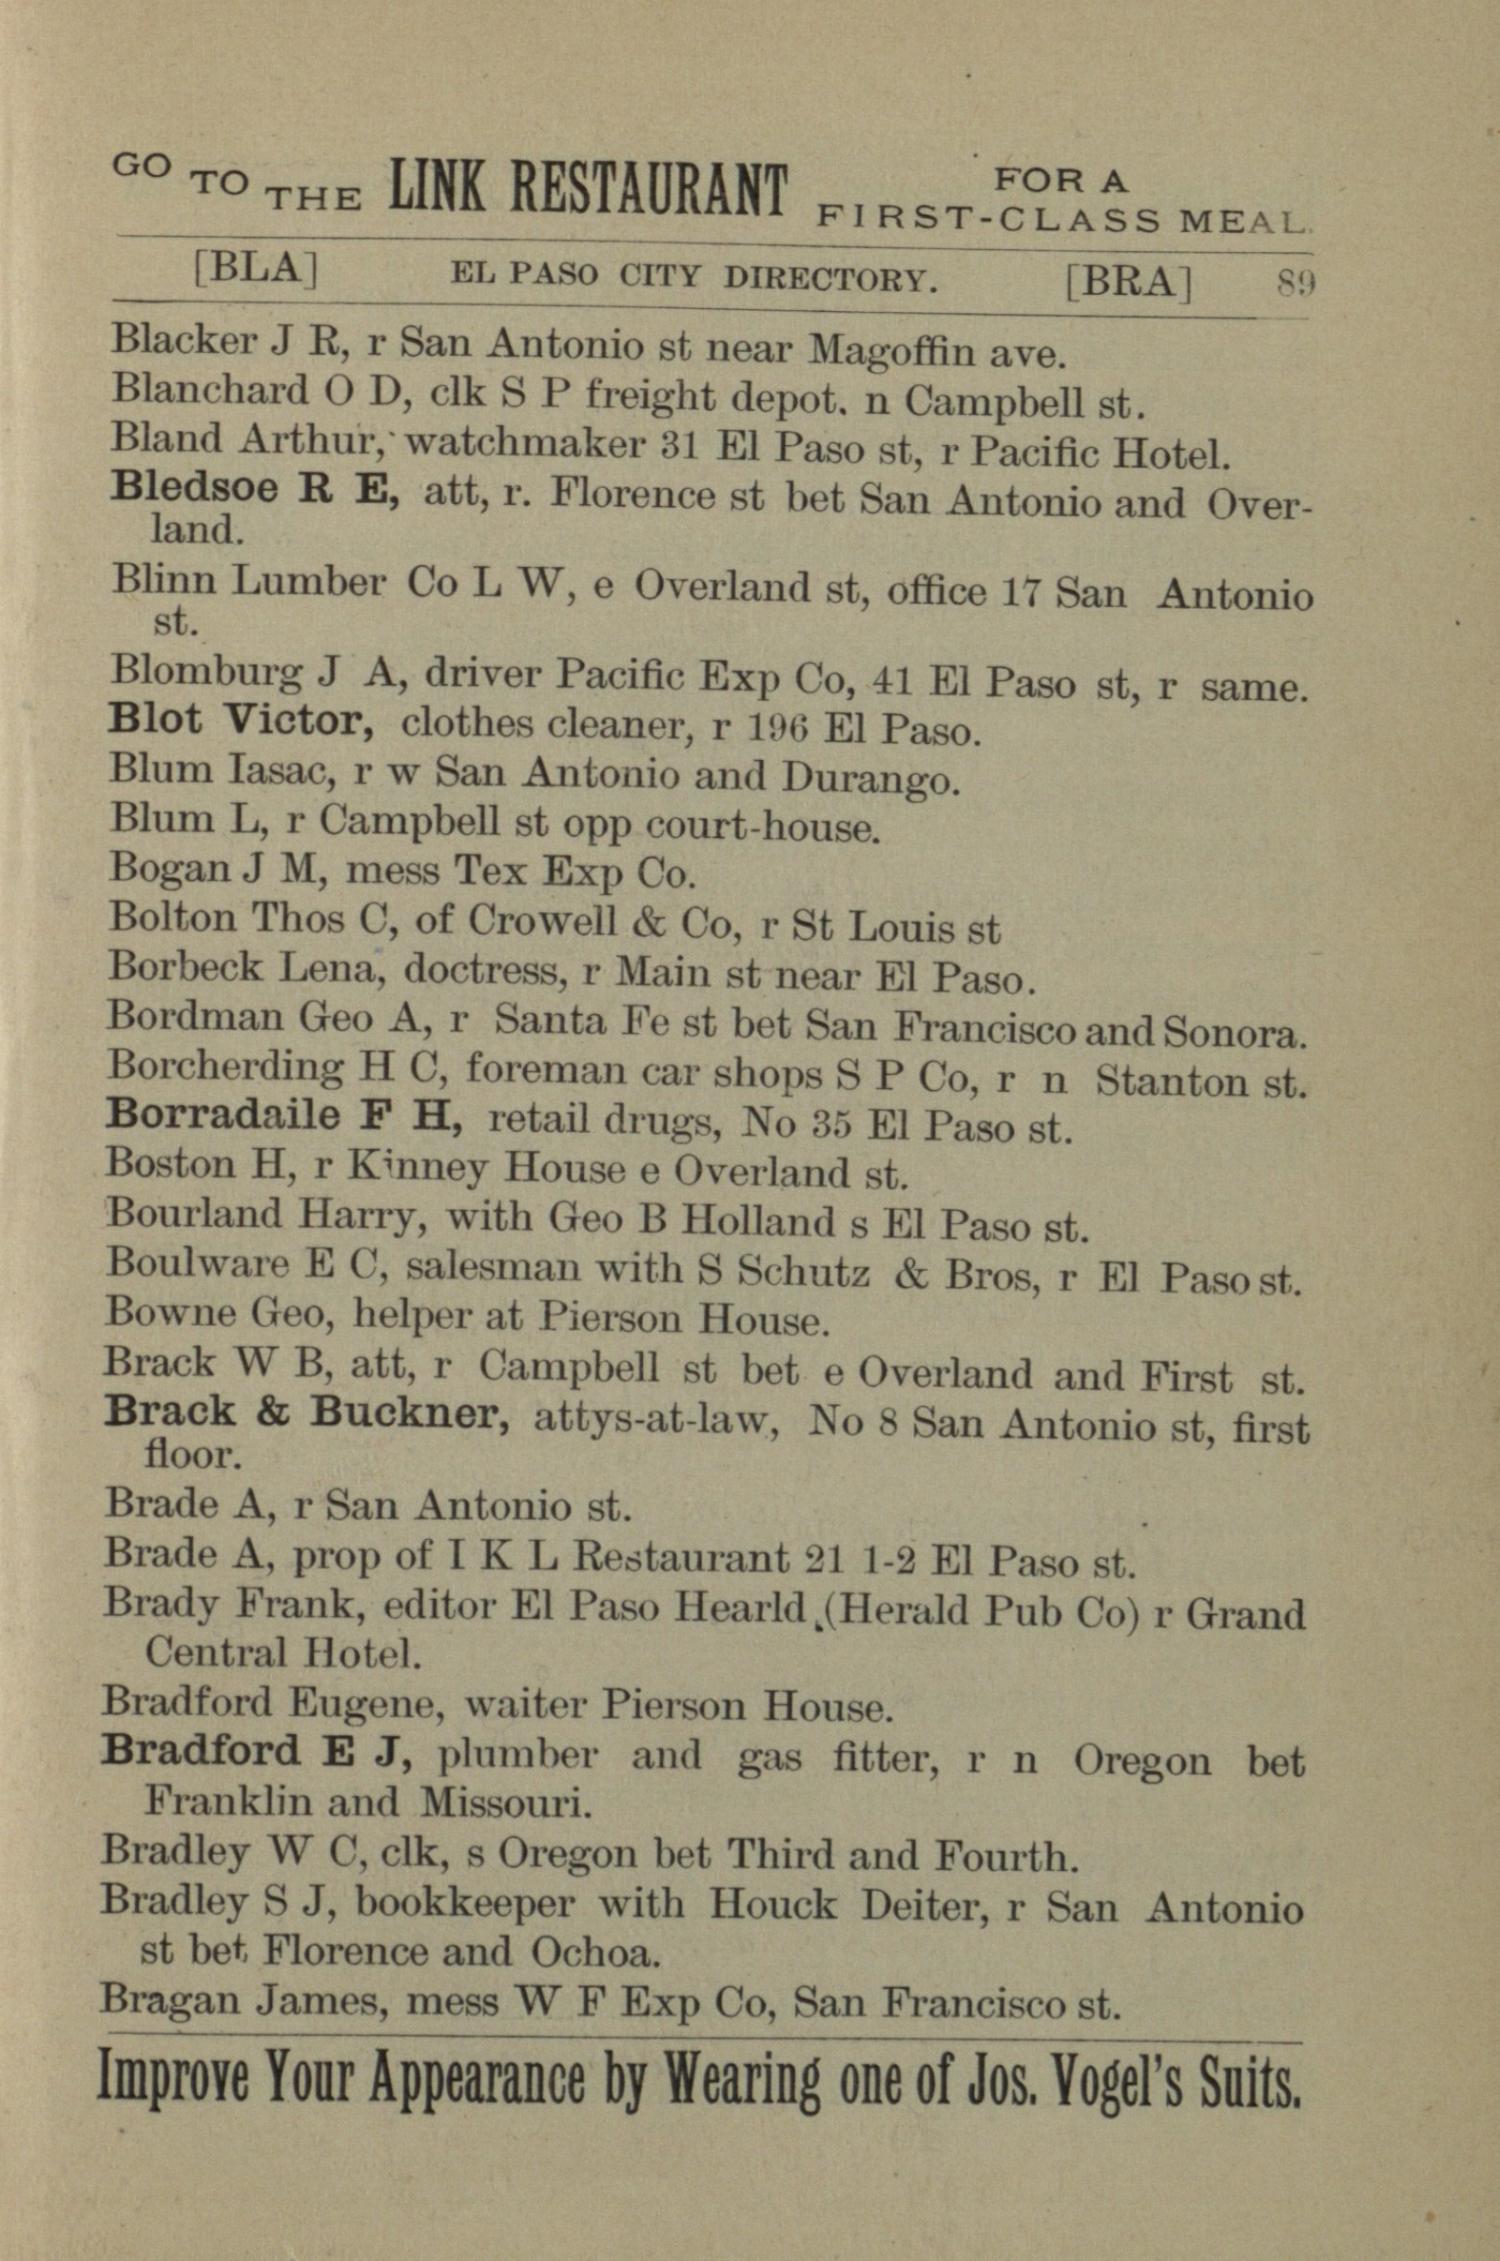 General Directory of the City of El Paso for 1886-87.
                                                
                                                    89
                                                